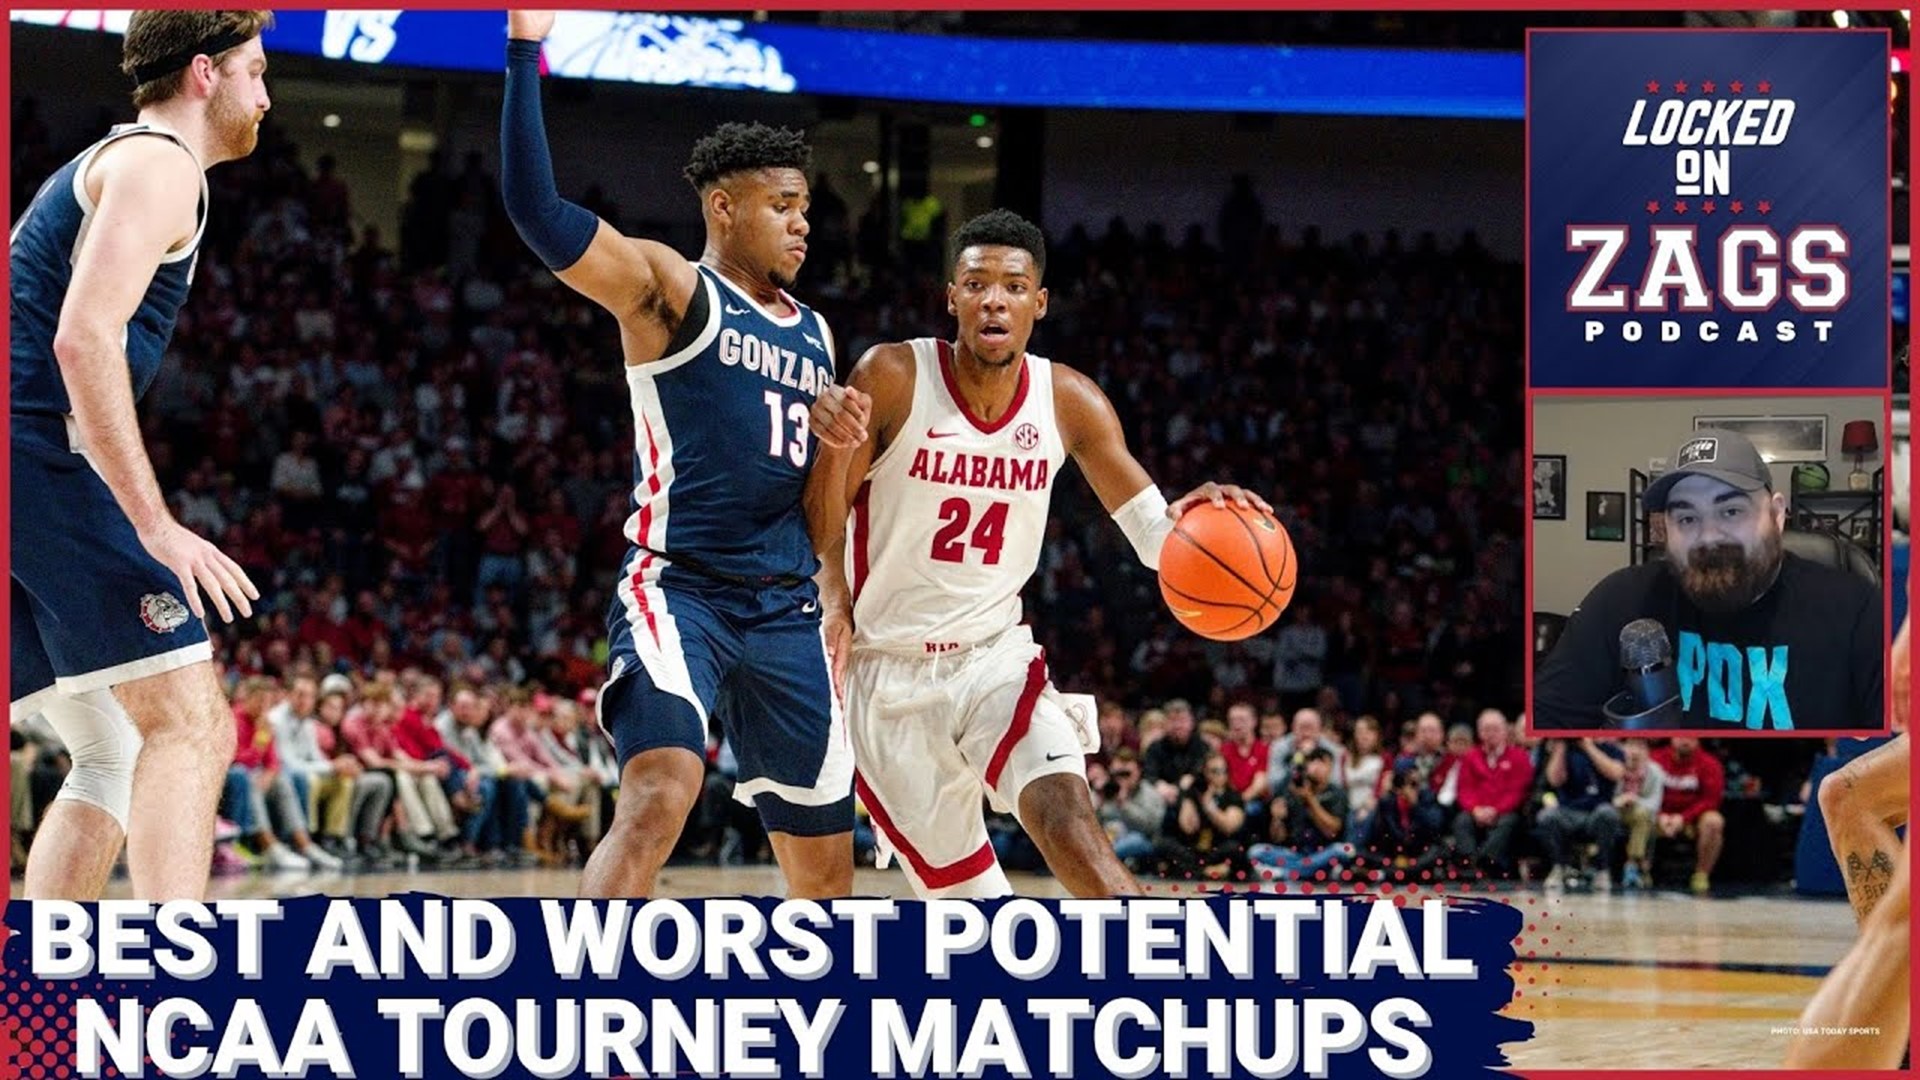 Gonzaga was projected as a four-seed in the first NCAA Tournament preview. We take a look at which top teams present the best and worst matchups for the Zags.